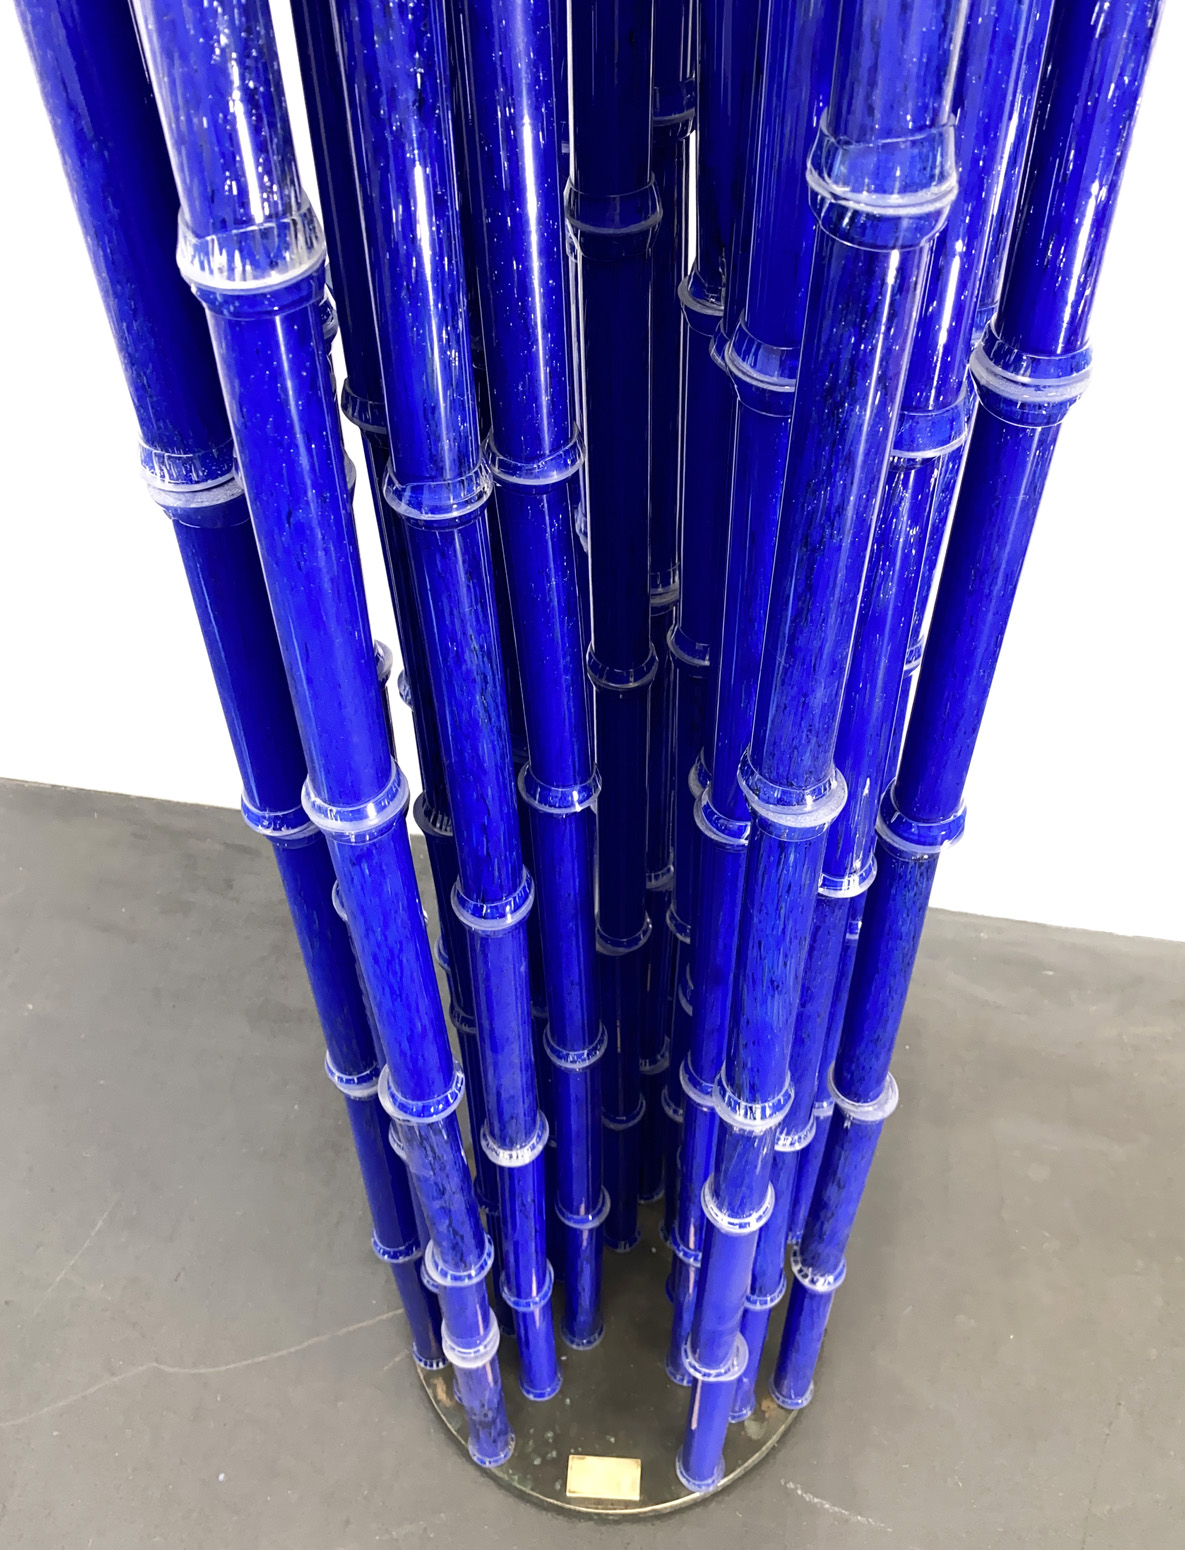 “SOLD” Blue Bamboo “Canneto” large Glass Object by Pino Castagna for Berengo Studios Murano Italy, 1990s. Consisting of 252 pieces of handblown blue Glass Rods in Bamboo-Form.